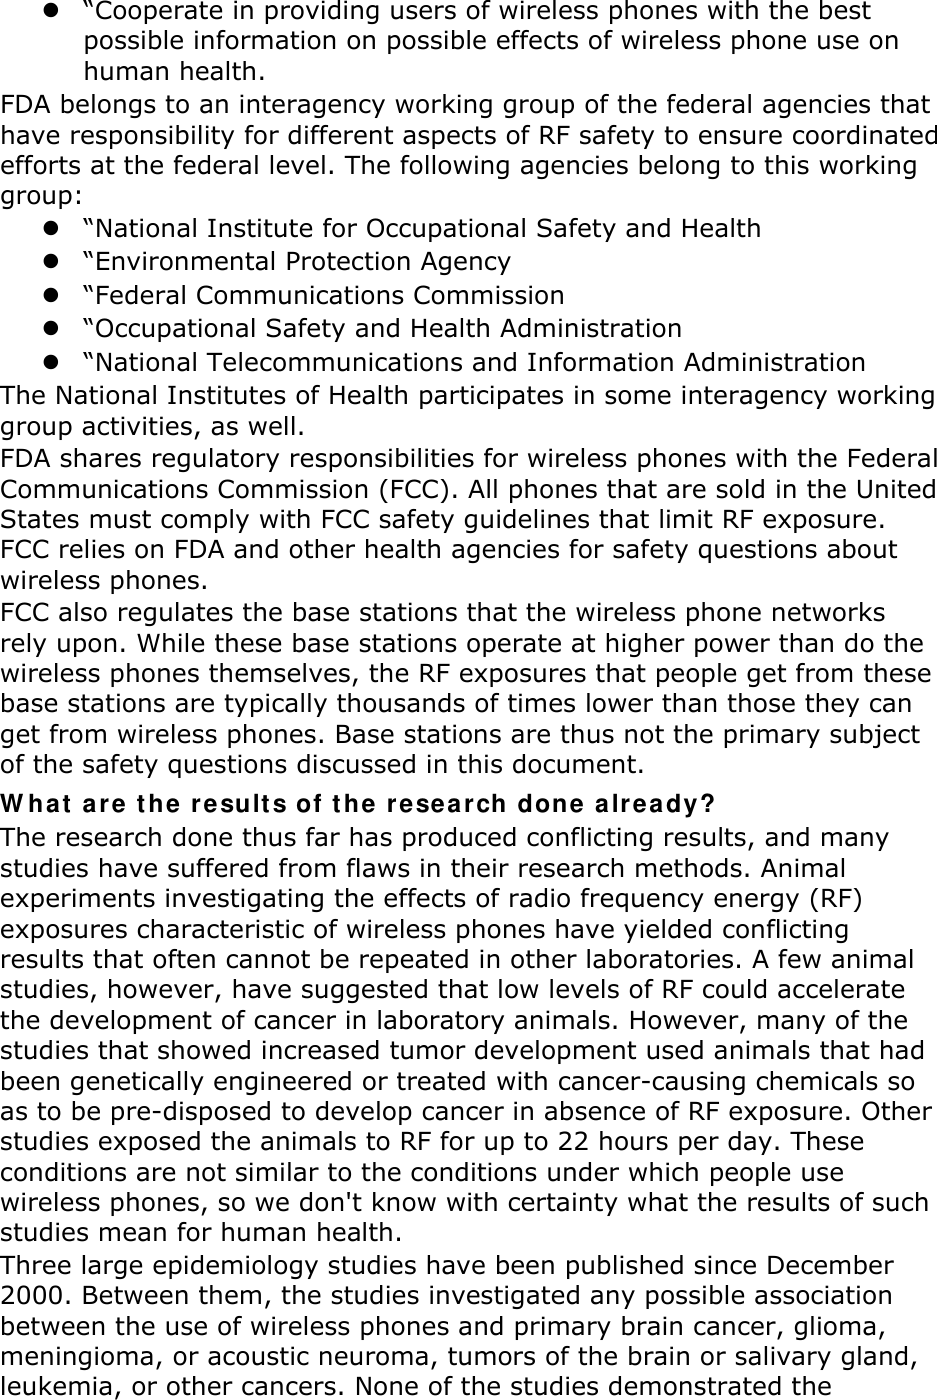 z “Cooperate in providing users of wireless phones with the best possible information on possible effects of wireless phone use on human health. FDA belongs to an interagency working group of the federal agencies that have responsibility for different aspects of RF safety to ensure coordinated efforts at the federal level. The following agencies belong to this working group: z “National Institute for Occupational Safety and Health z “Environmental Protection Agency z “Federal Communications Commission z “Occupational Safety and Health Administration z “National Telecommunications and Information Administration The National Institutes of Health participates in some interagency working group activities, as well. FDA shares regulatory responsibilities for wireless phones with the Federal Communications Commission (FCC). All phones that are sold in the United States must comply with FCC safety guidelines that limit RF exposure. FCC relies on FDA and other health agencies for safety questions about wireless phones. FCC also regulates the base stations that the wireless phone networks rely upon. While these base stations operate at higher power than do the wireless phones themselves, the RF exposures that people get from these base stations are typically thousands of times lower than those they can get from wireless phones. Base stations are thus not the primary subject of the safety questions discussed in this document. W hat  are t he re sults of t he rese a rch done a lready? The research done thus far has produced conflicting results, and many studies have suffered from flaws in their research methods. Animal experiments investigating the effects of radio frequency energy (RF) exposures characteristic of wireless phones have yielded conflicting results that often cannot be repeated in other laboratories. A few animal studies, however, have suggested that low levels of RF could accelerate the development of cancer in laboratory animals. However, many of the studies that showed increased tumor development used animals that had been genetically engineered or treated with cancer-causing chemicals so as to be pre-disposed to develop cancer in absence of RF exposure. Other studies exposed the animals to RF for up to 22 hours per day. These conditions are not similar to the conditions under which people use wireless phones, so we don&apos;t know with certainty what the results of such studies mean for human health. Three large epidemiology studies have been published since December 2000. Between them, the studies investigated any possible association between the use of wireless phones and primary brain cancer, glioma, meningioma, or acoustic neuroma, tumors of the brain or salivary gland, leukemia, or other cancers. None of the studies demonstrated the 